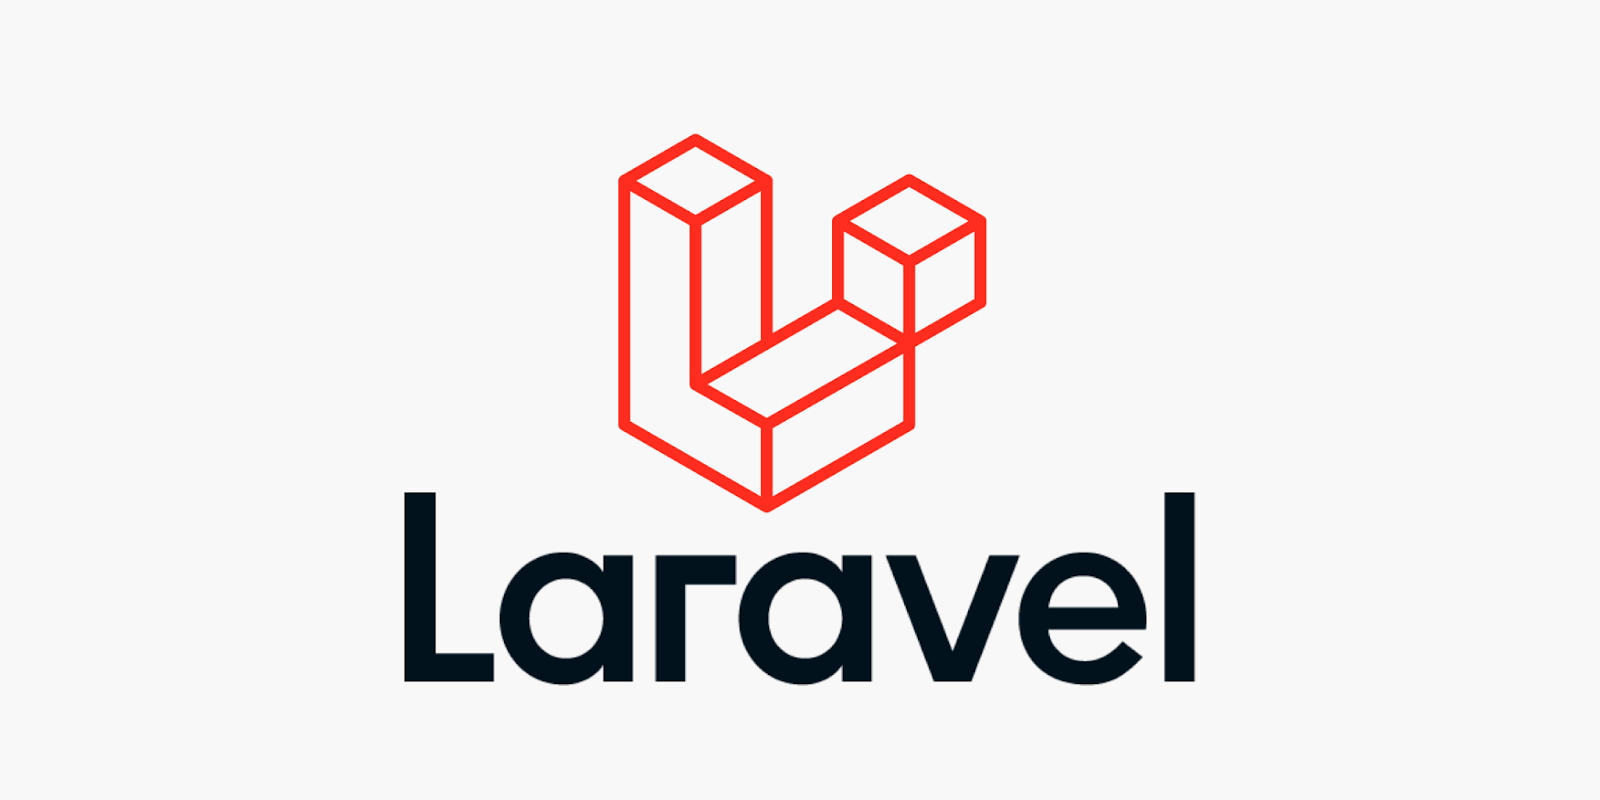 The Laravel logo with the word in black and the logo in red on top of the Laravel word.